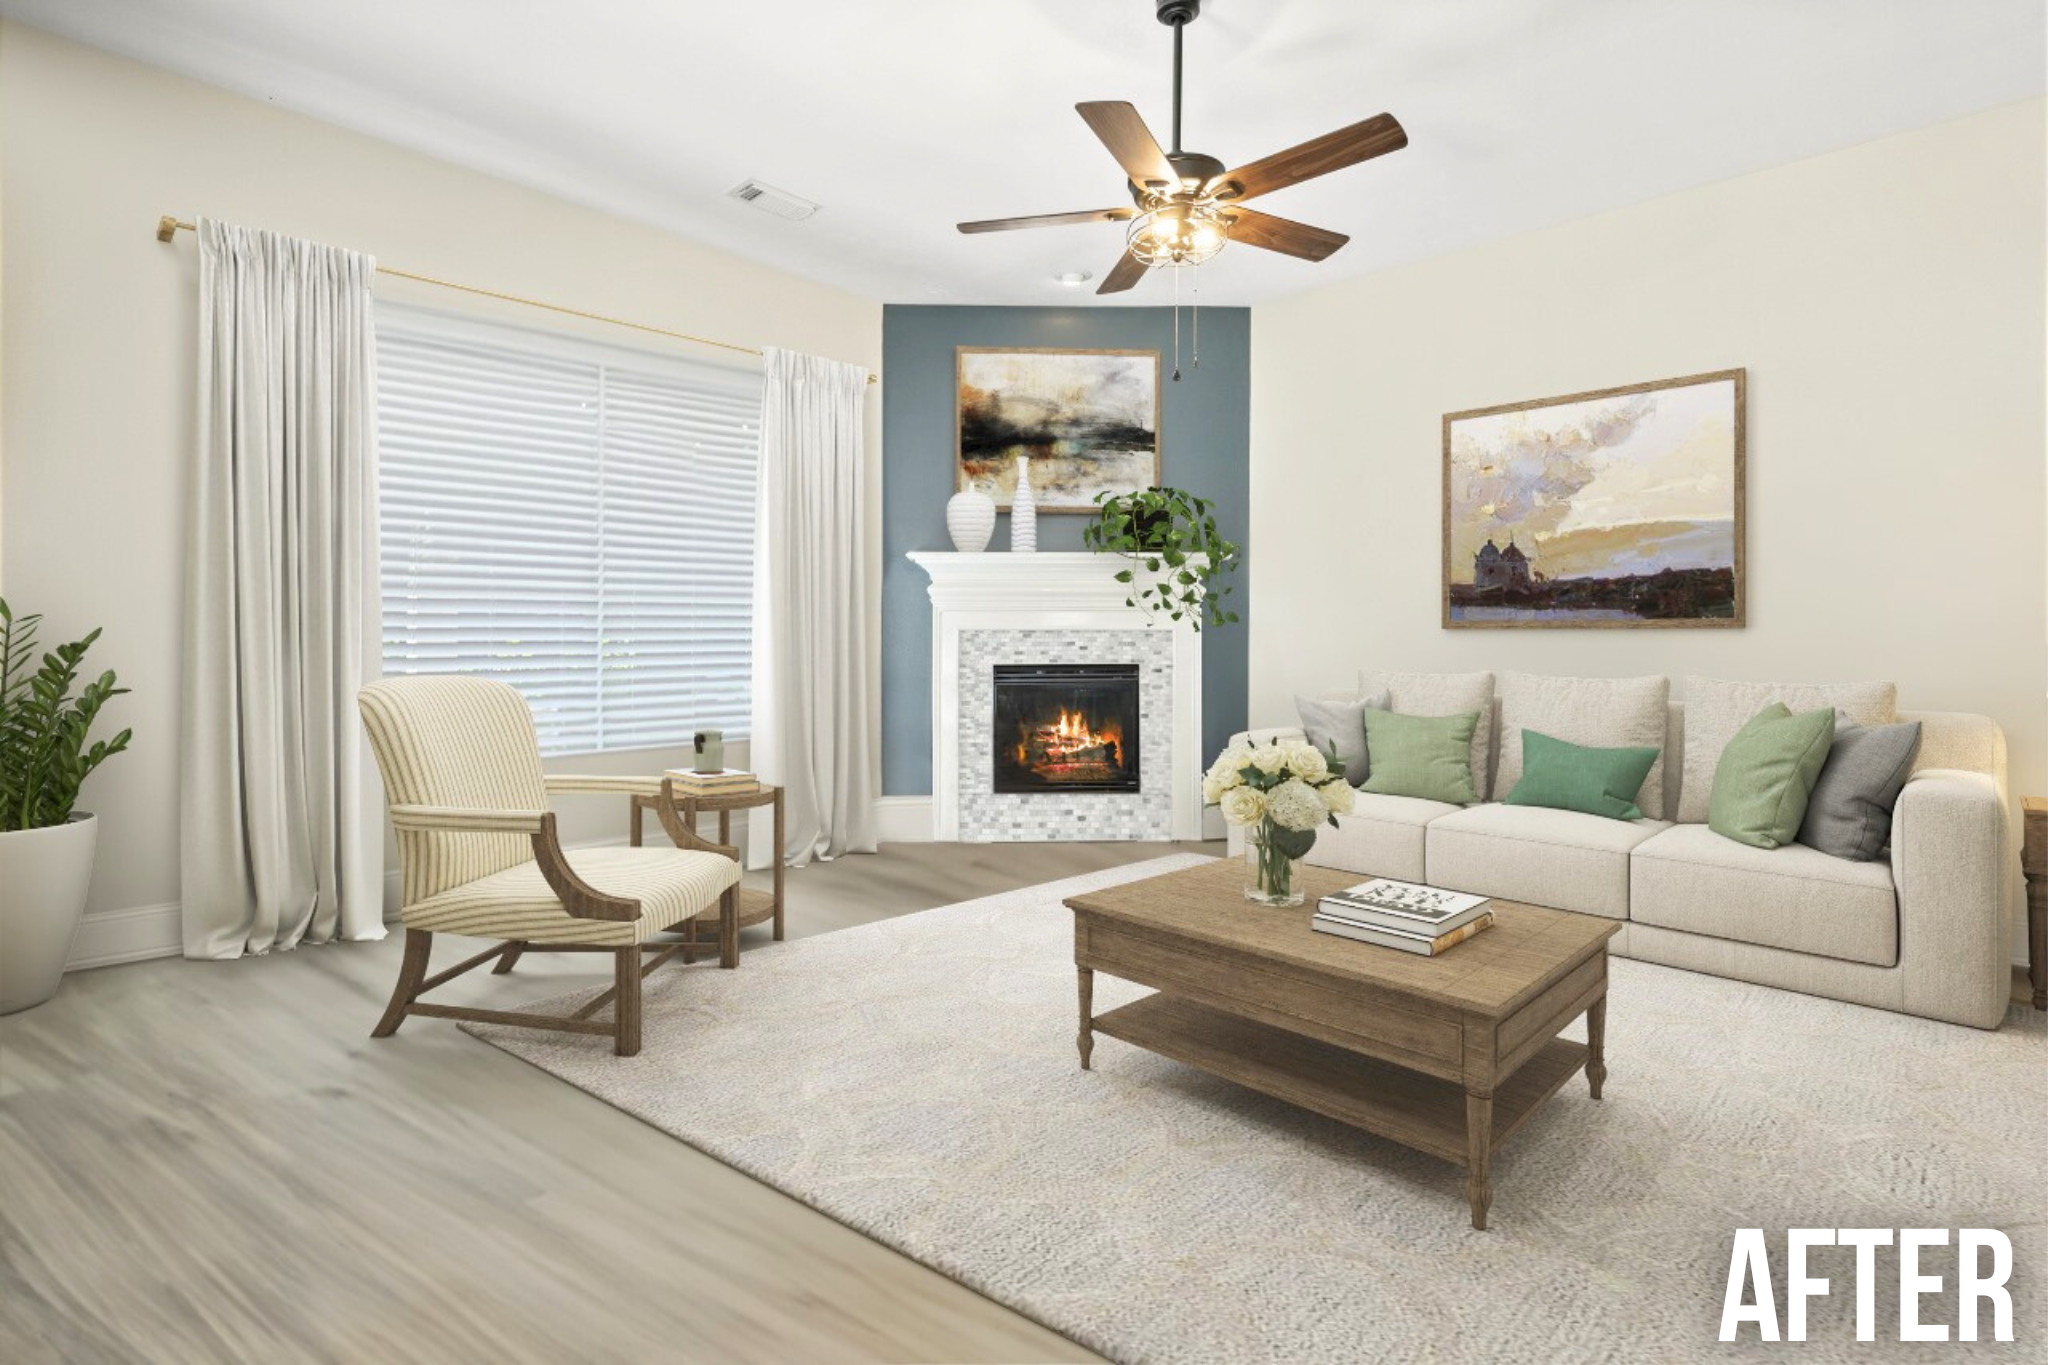 Square Foot Productions Virtual Staging, after image of a living room staged in light furniture